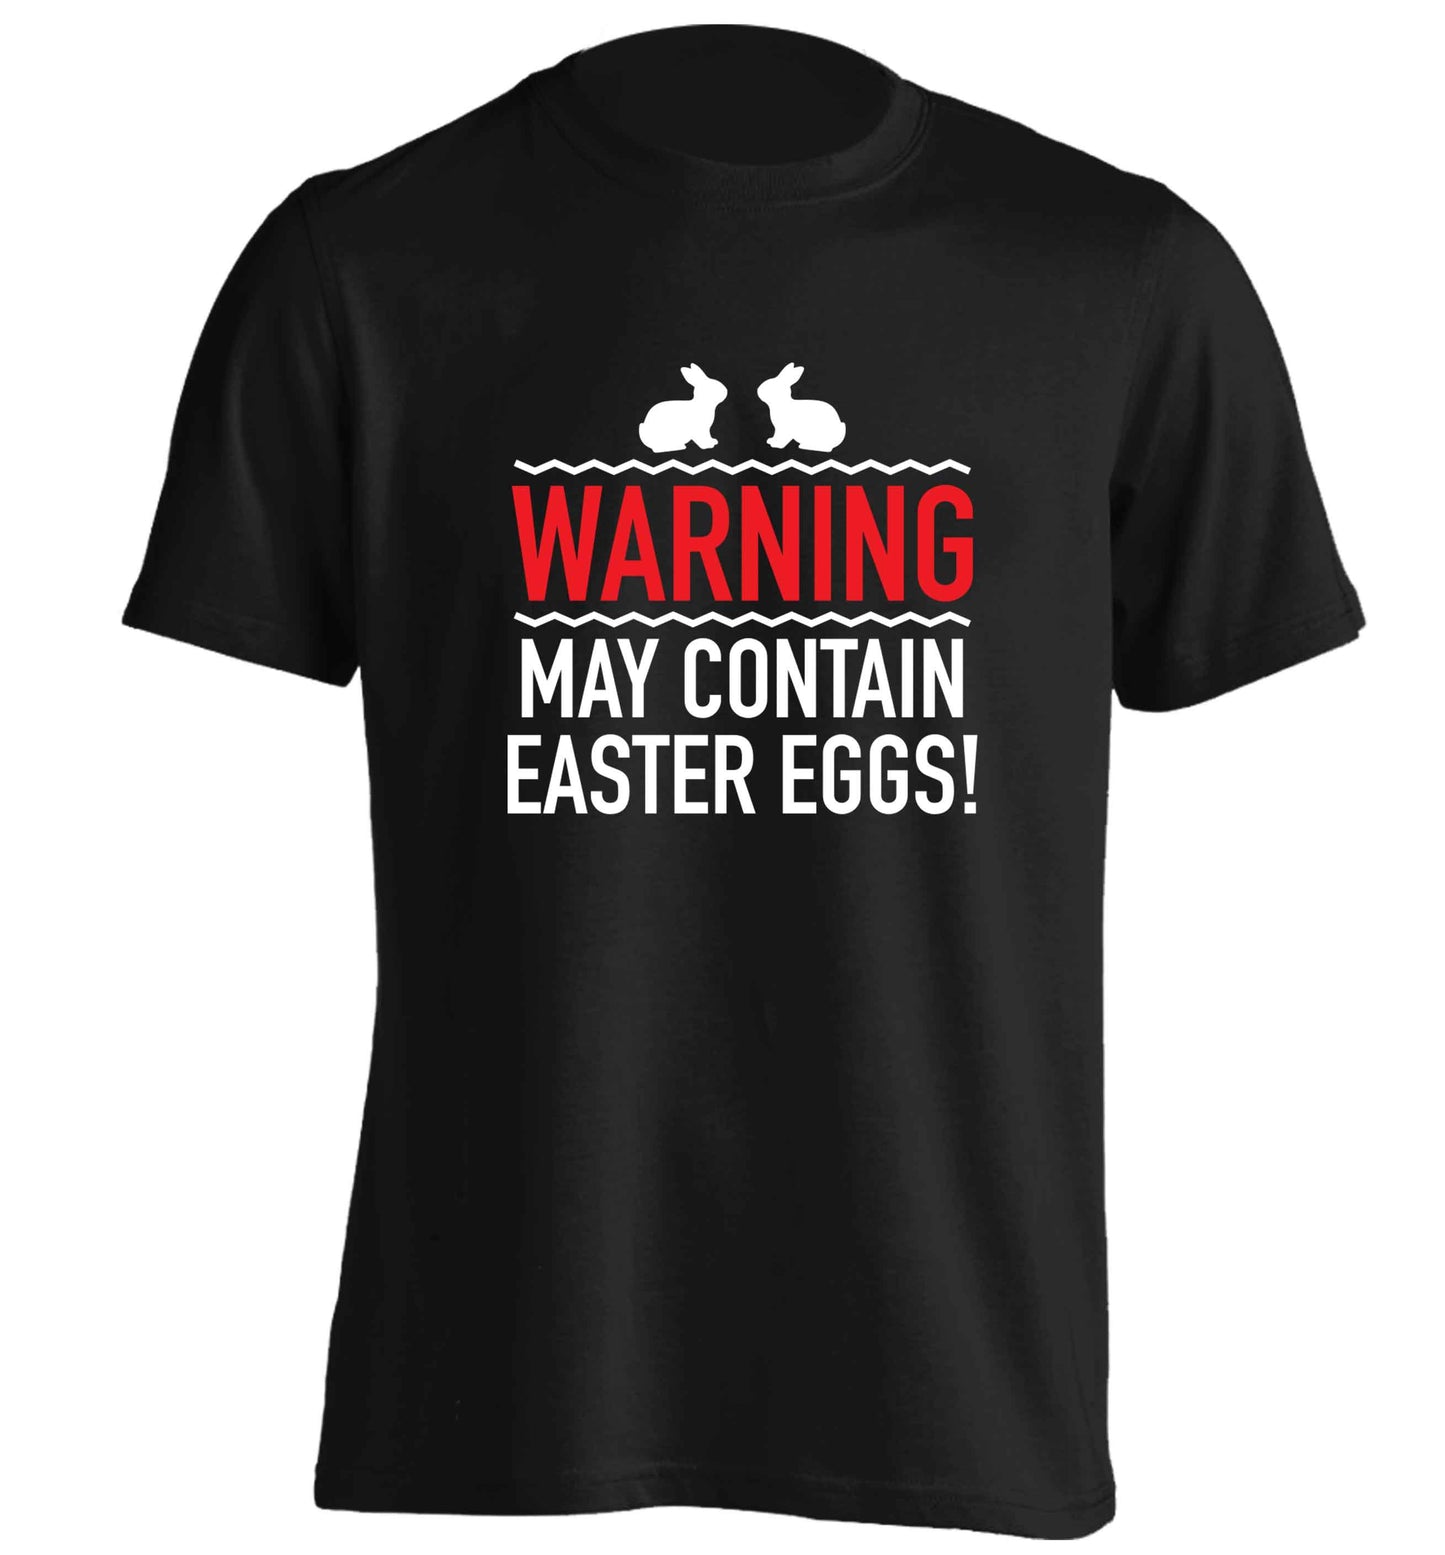 Warning may contain Easter eggs adults unisex black Tshirt 2XL